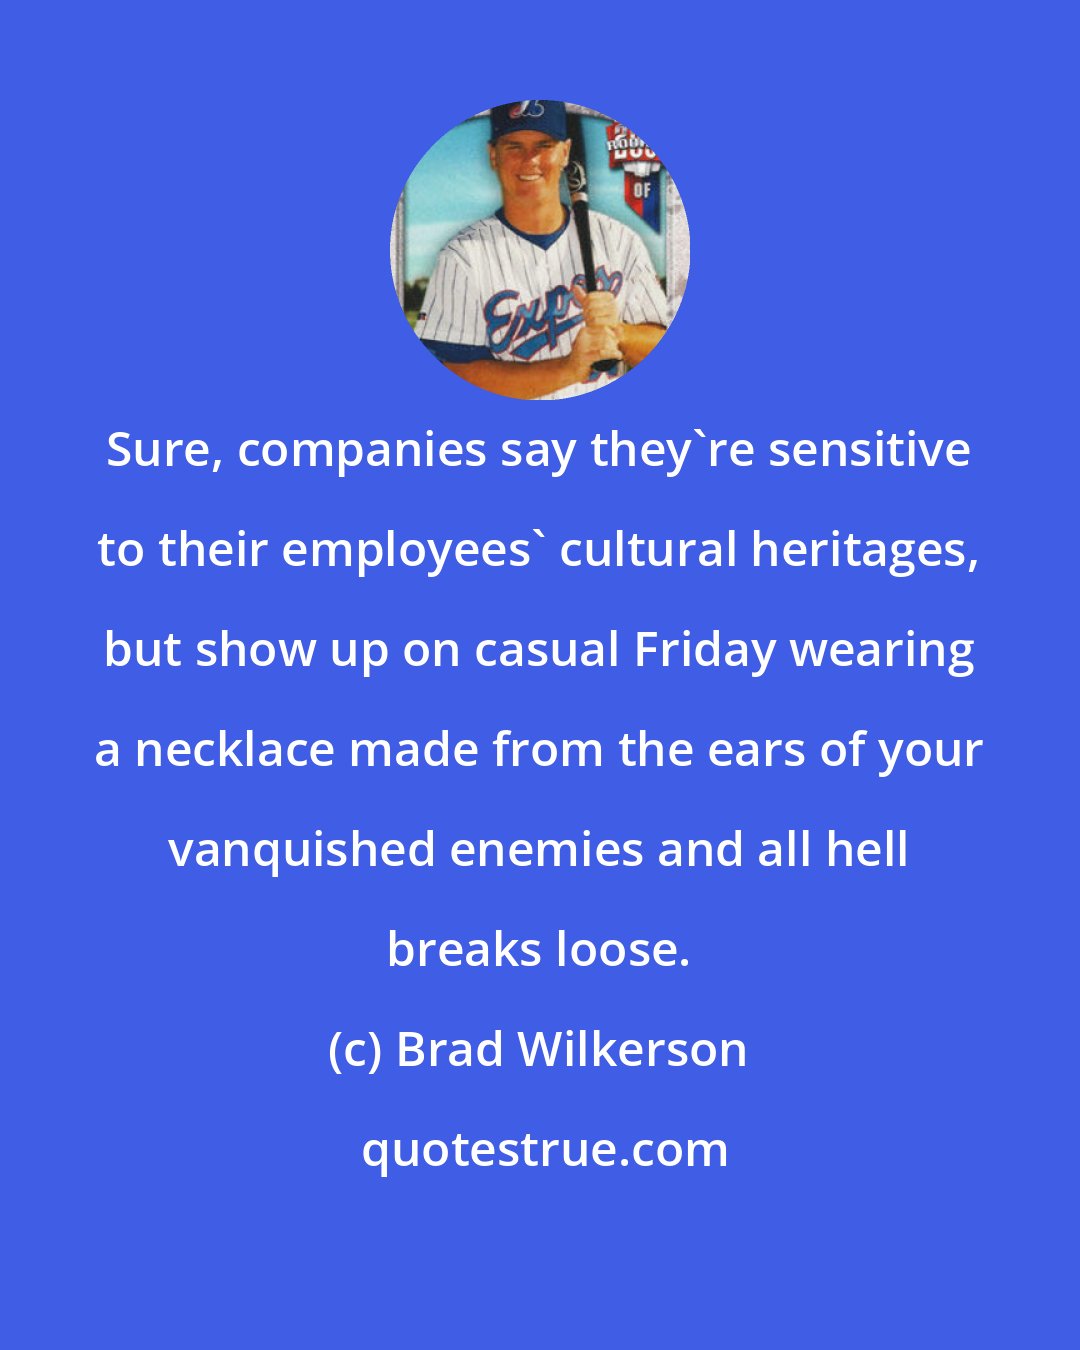 Brad Wilkerson: Sure, companies say they're sensitive to their employees' cultural heritages, but show up on casual Friday wearing a necklace made from the ears of your vanquished enemies and all hell breaks loose.